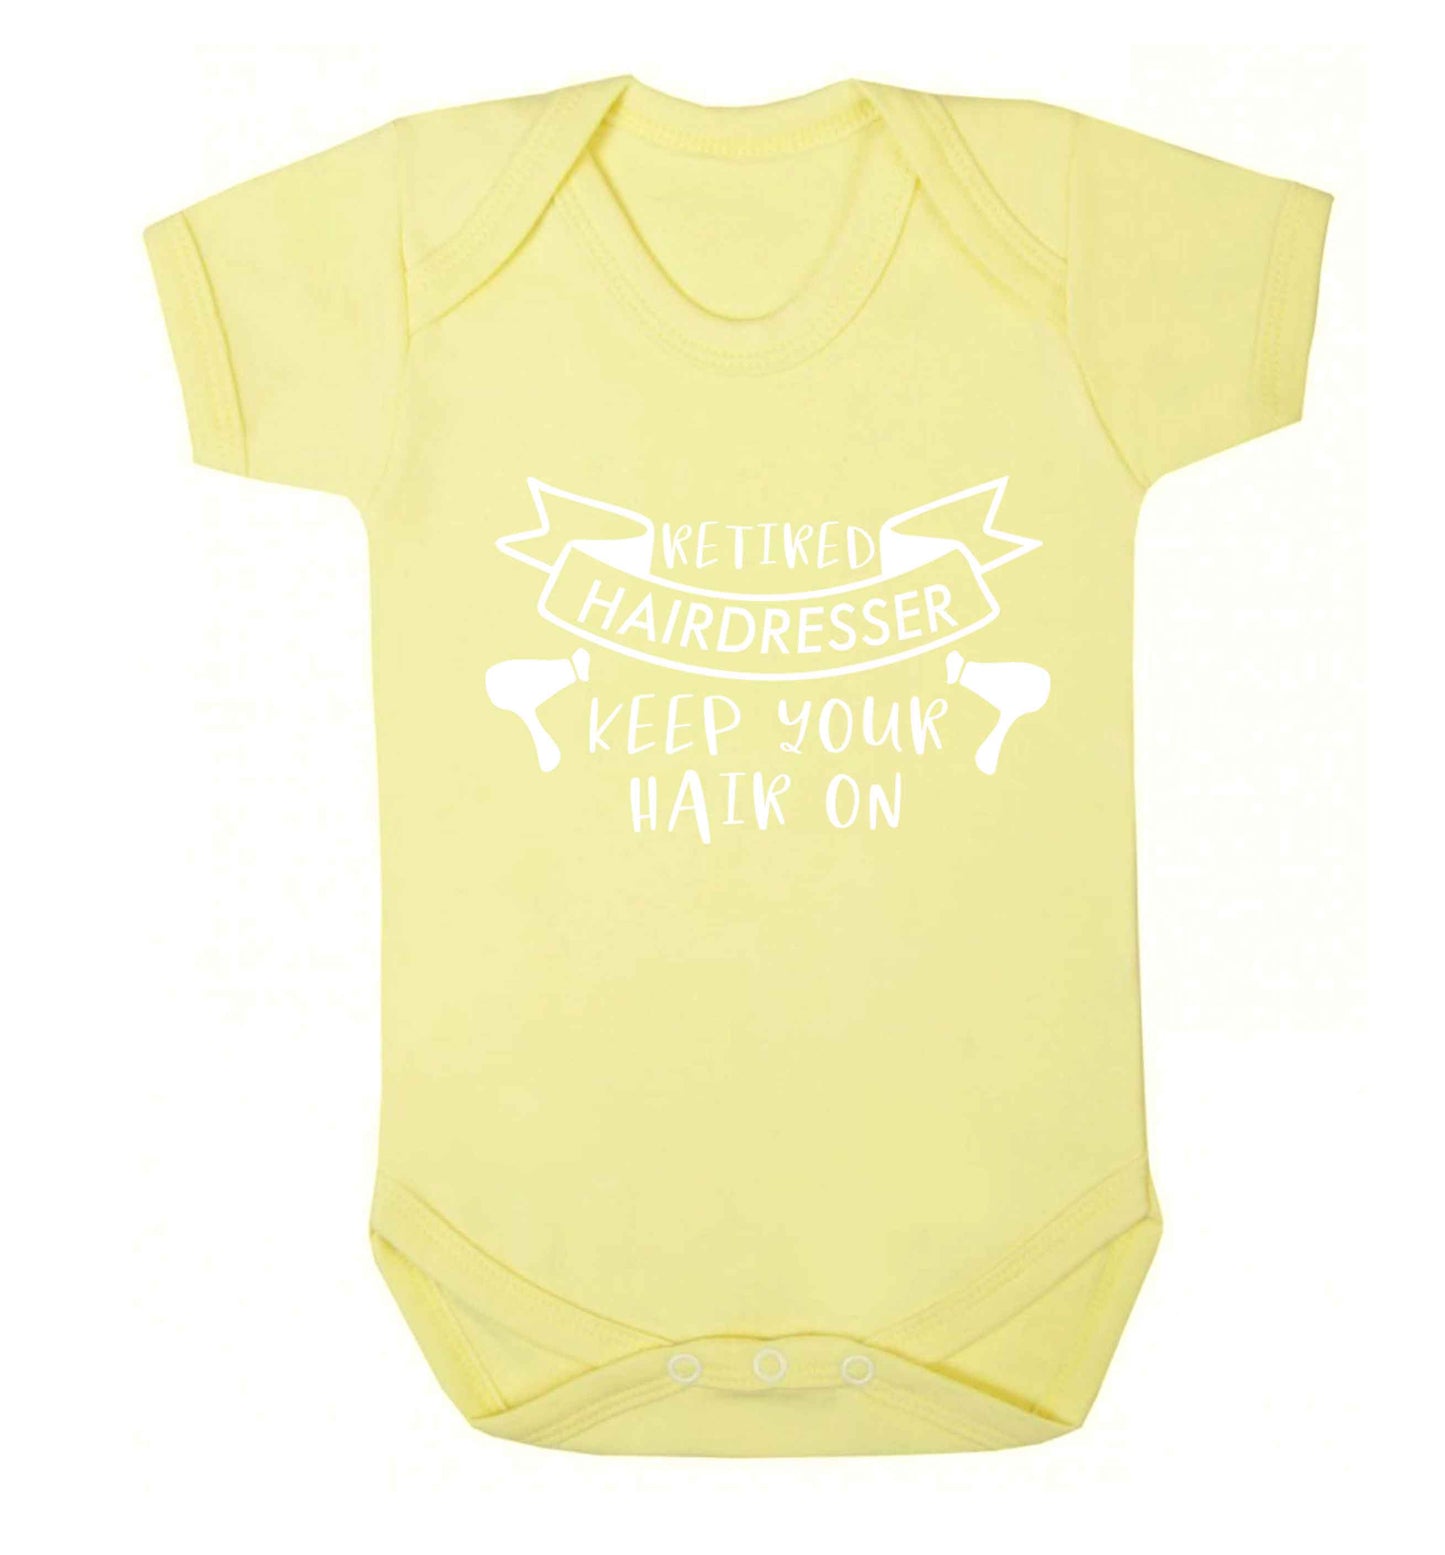 Retired hairdresser keep your hair on Baby Vest pale yellow 18-24 months